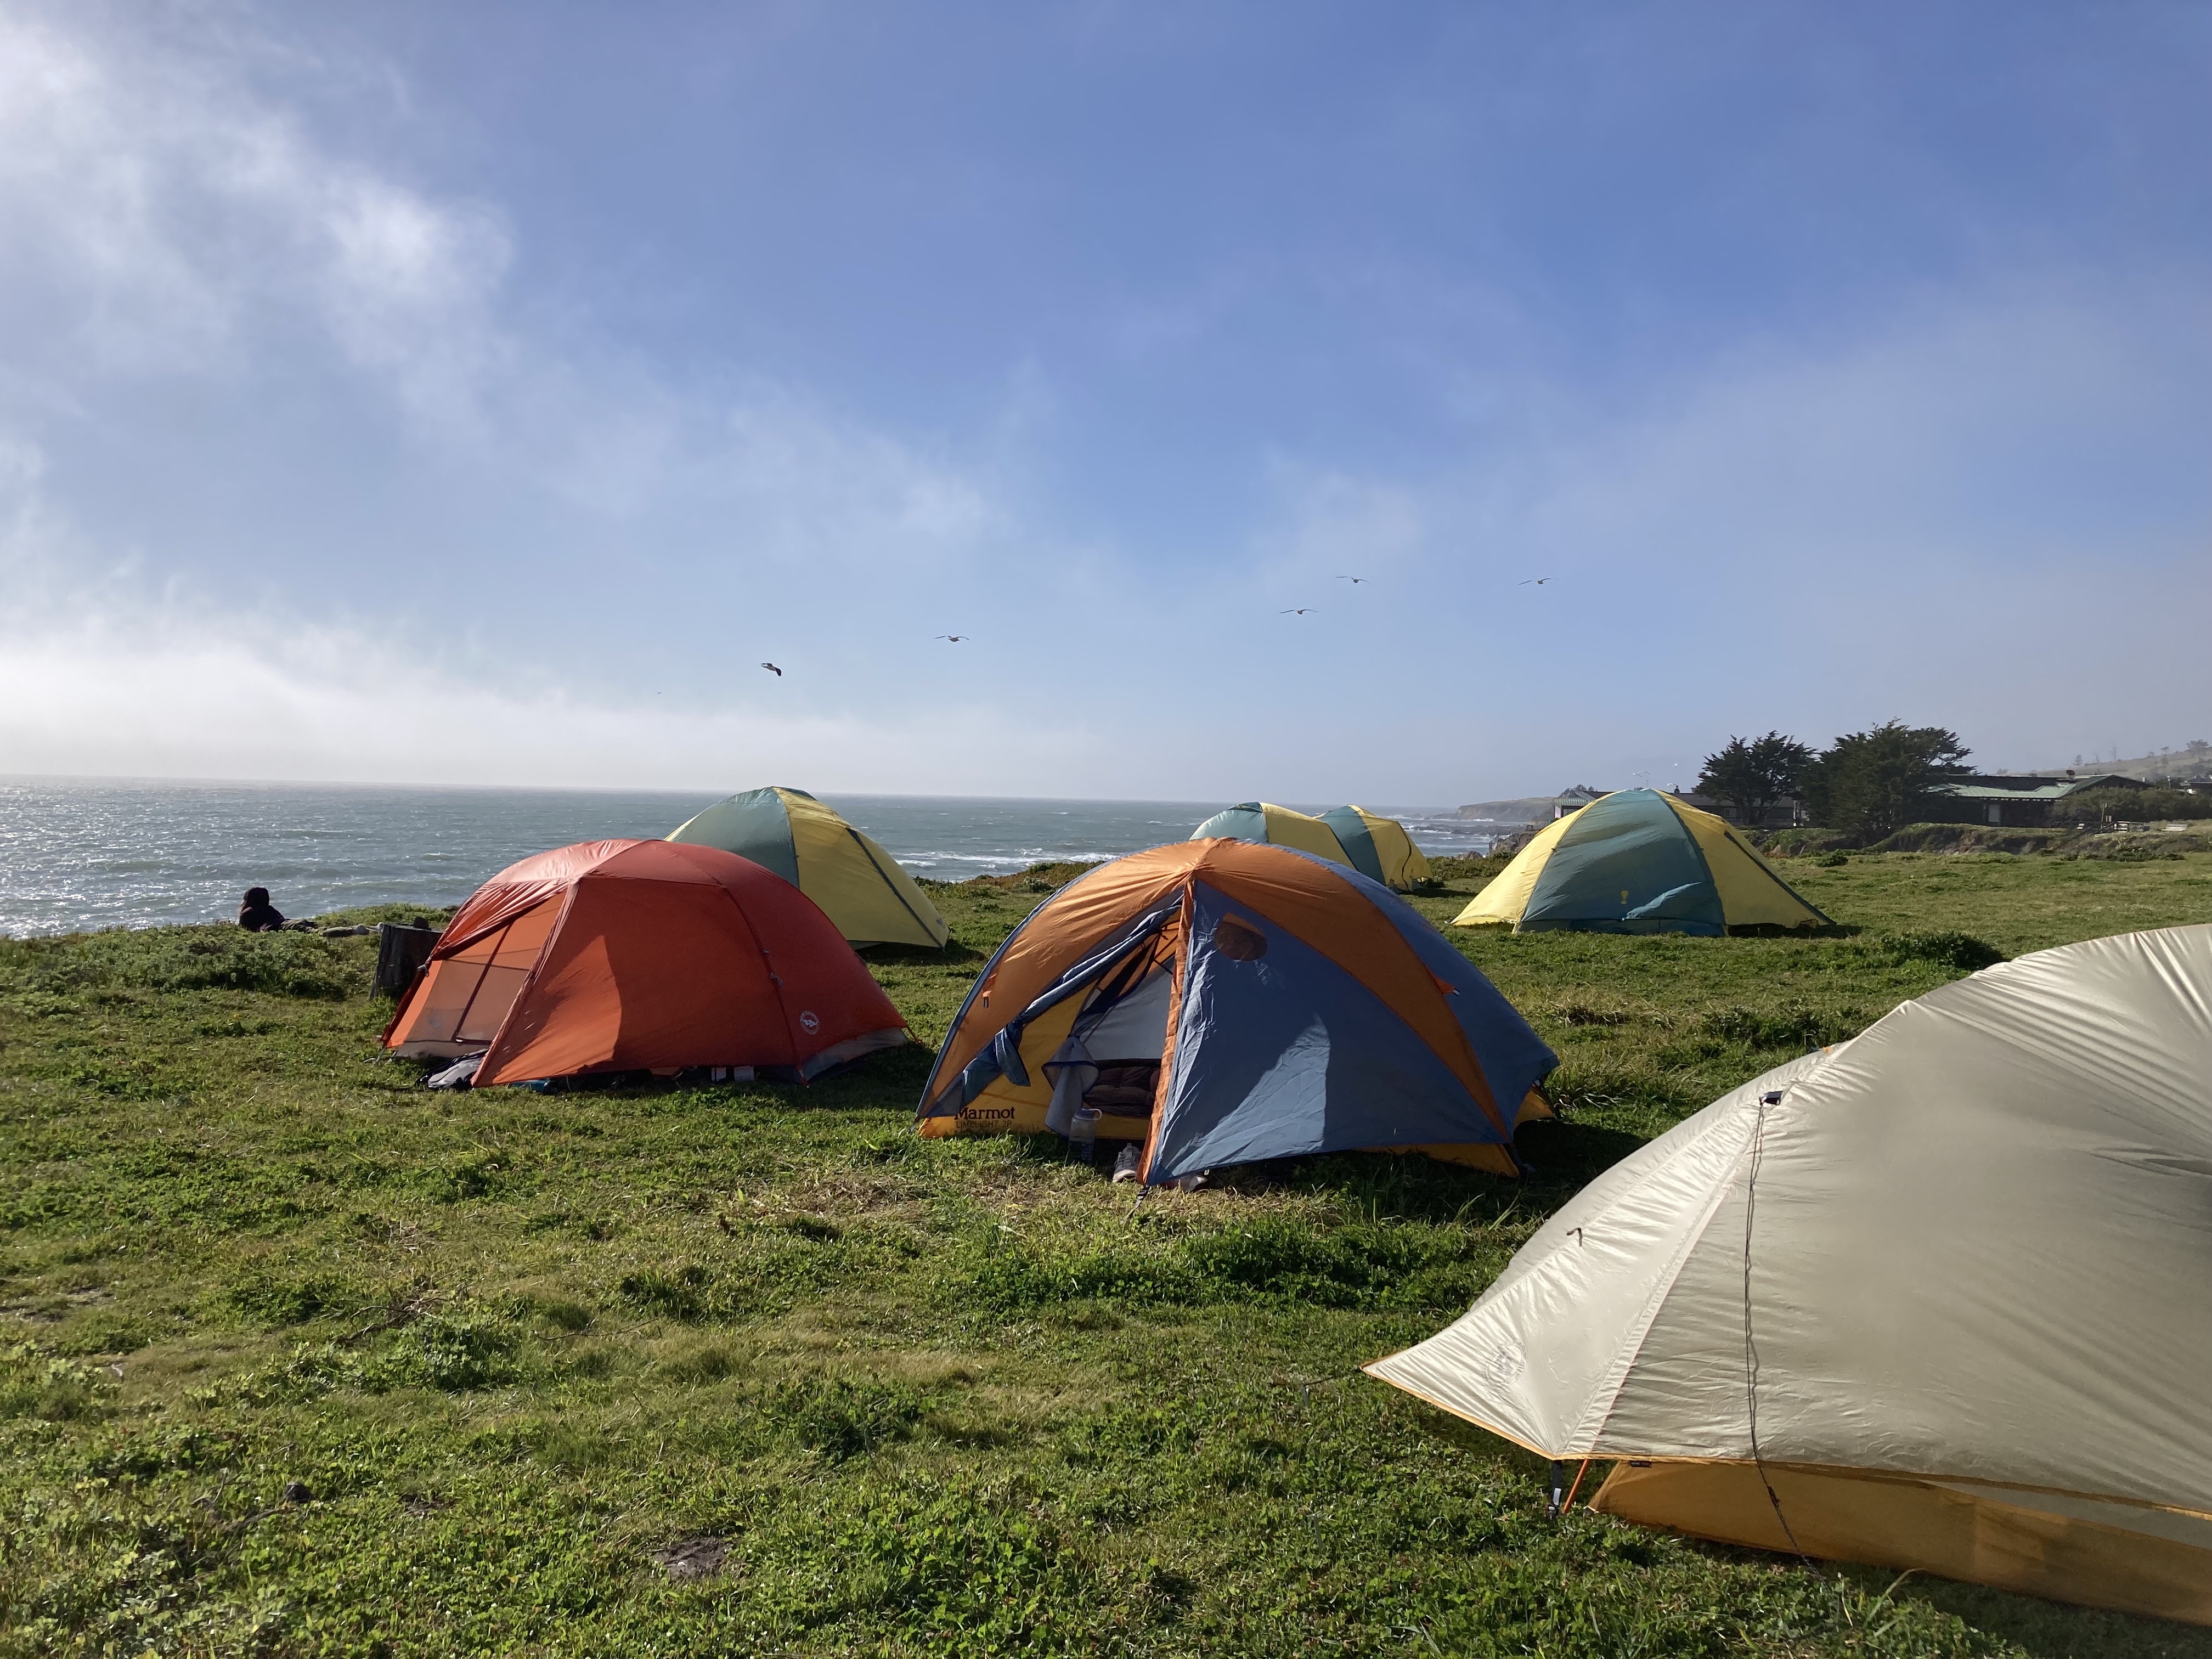 Tents overlooking the ocean at the Kenneth R. Norris Rancho Marino UC Reserve in Cambria, CA.